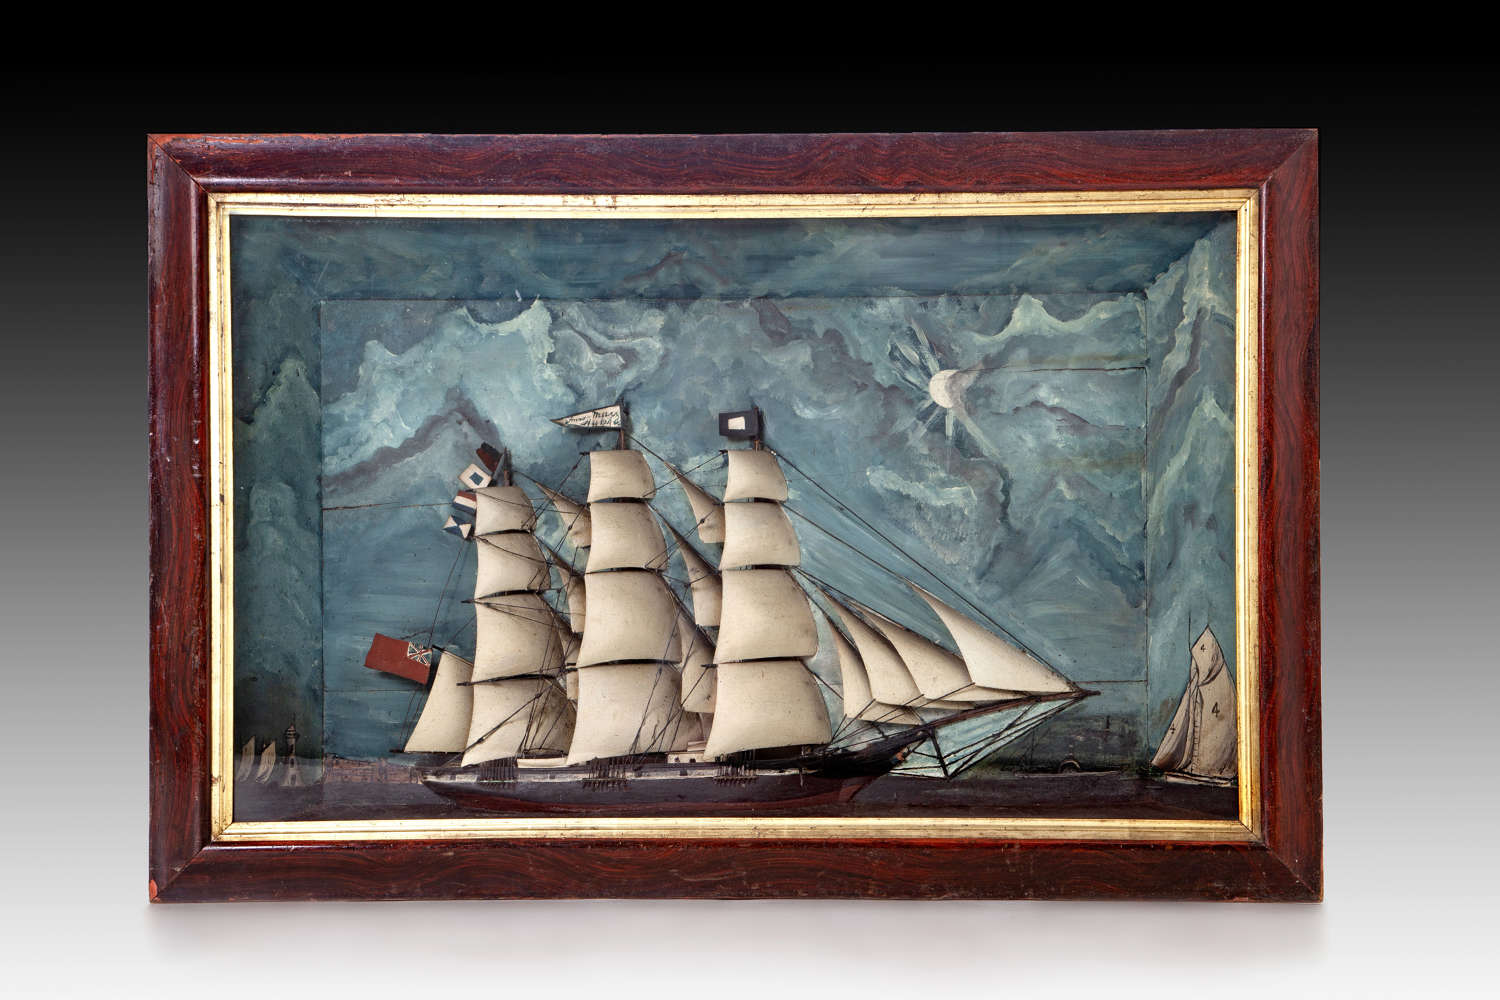 A magnificent diorama of a ship in stormy seas